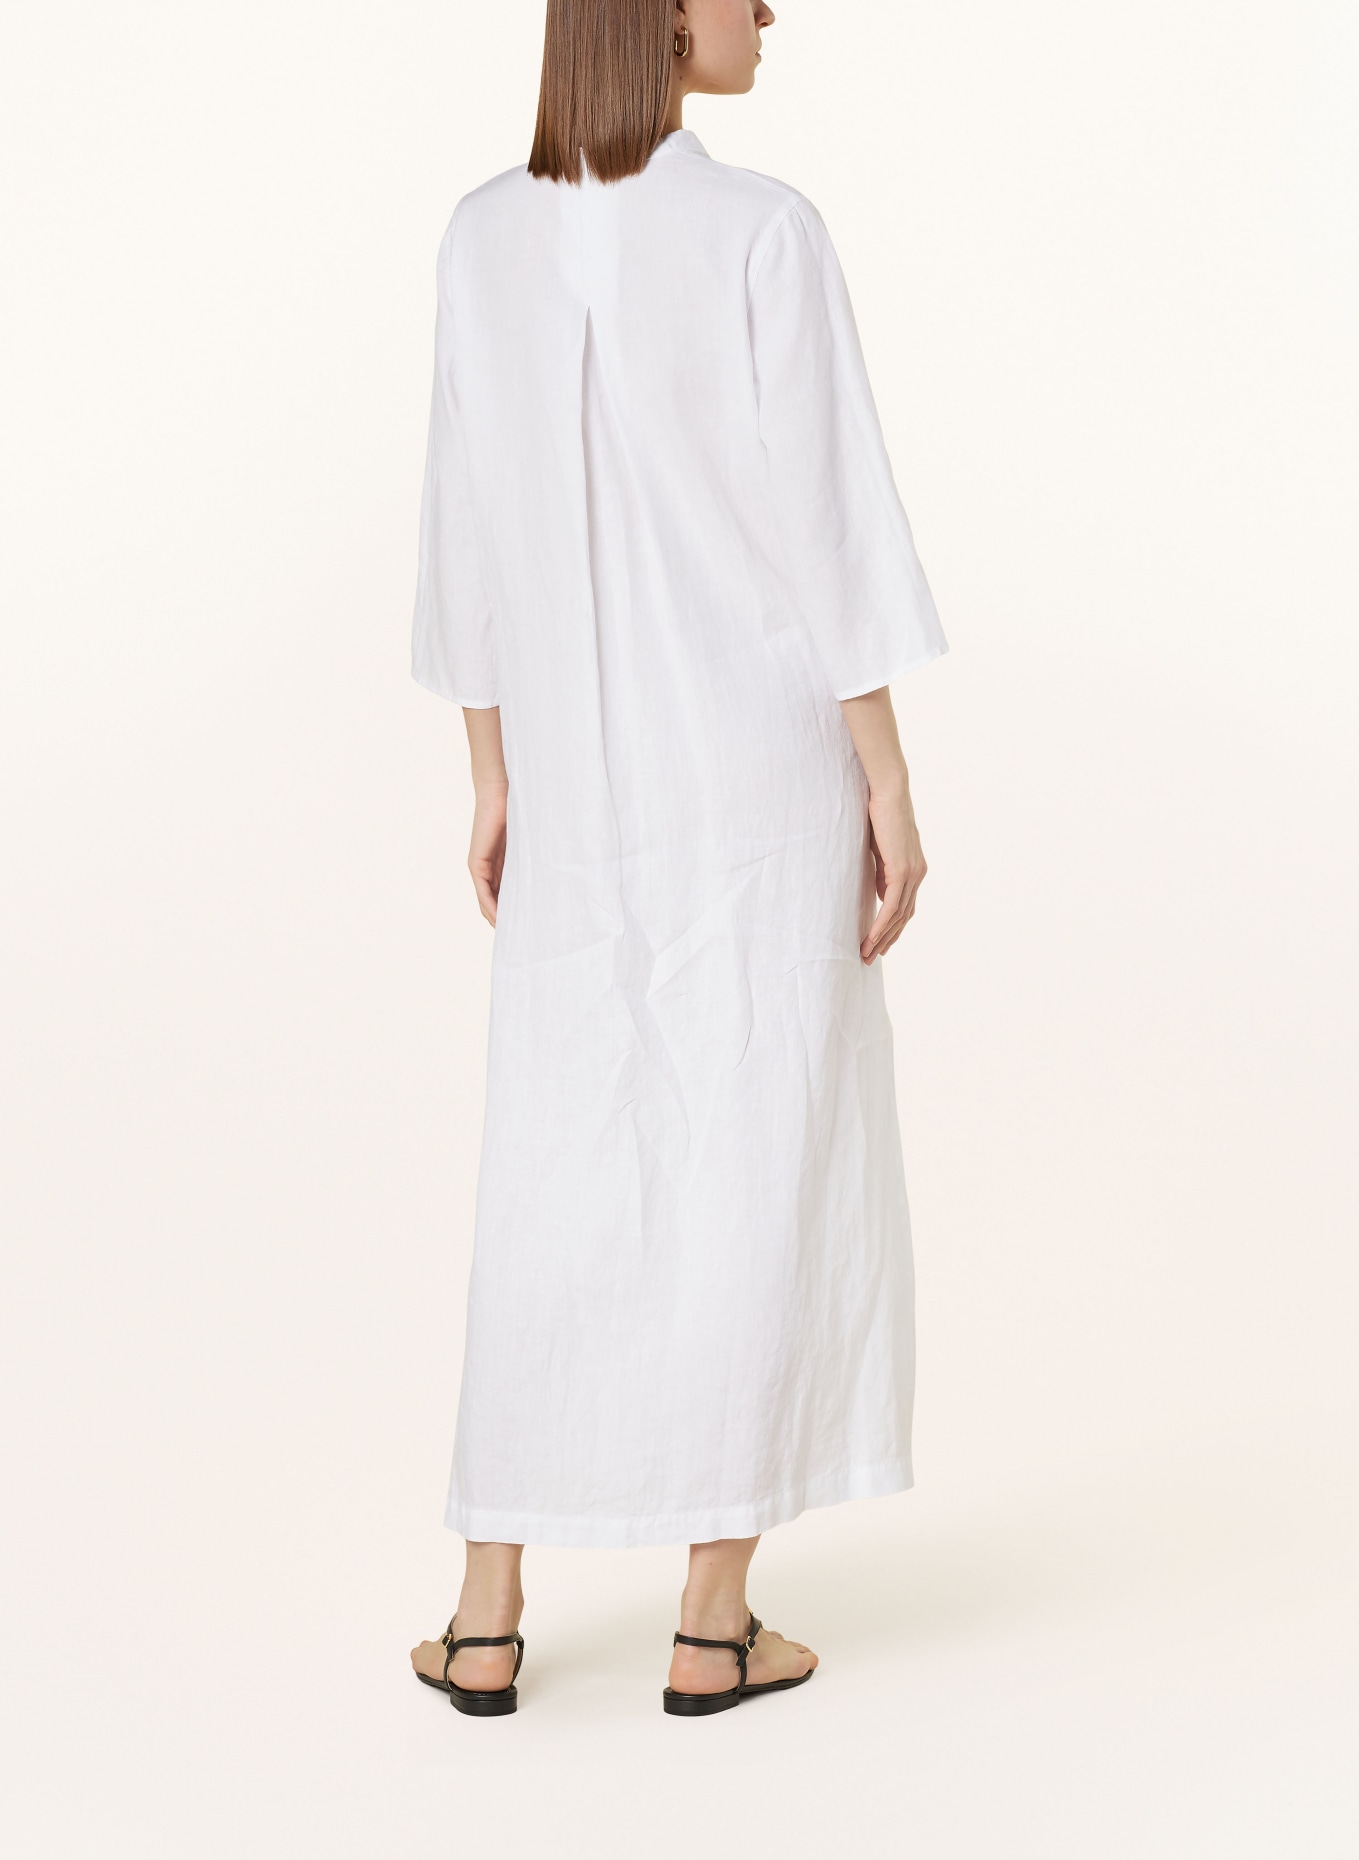 ROSSO35 Linen dress with 3/4 sleeves, Color: WHITE (Image 3)